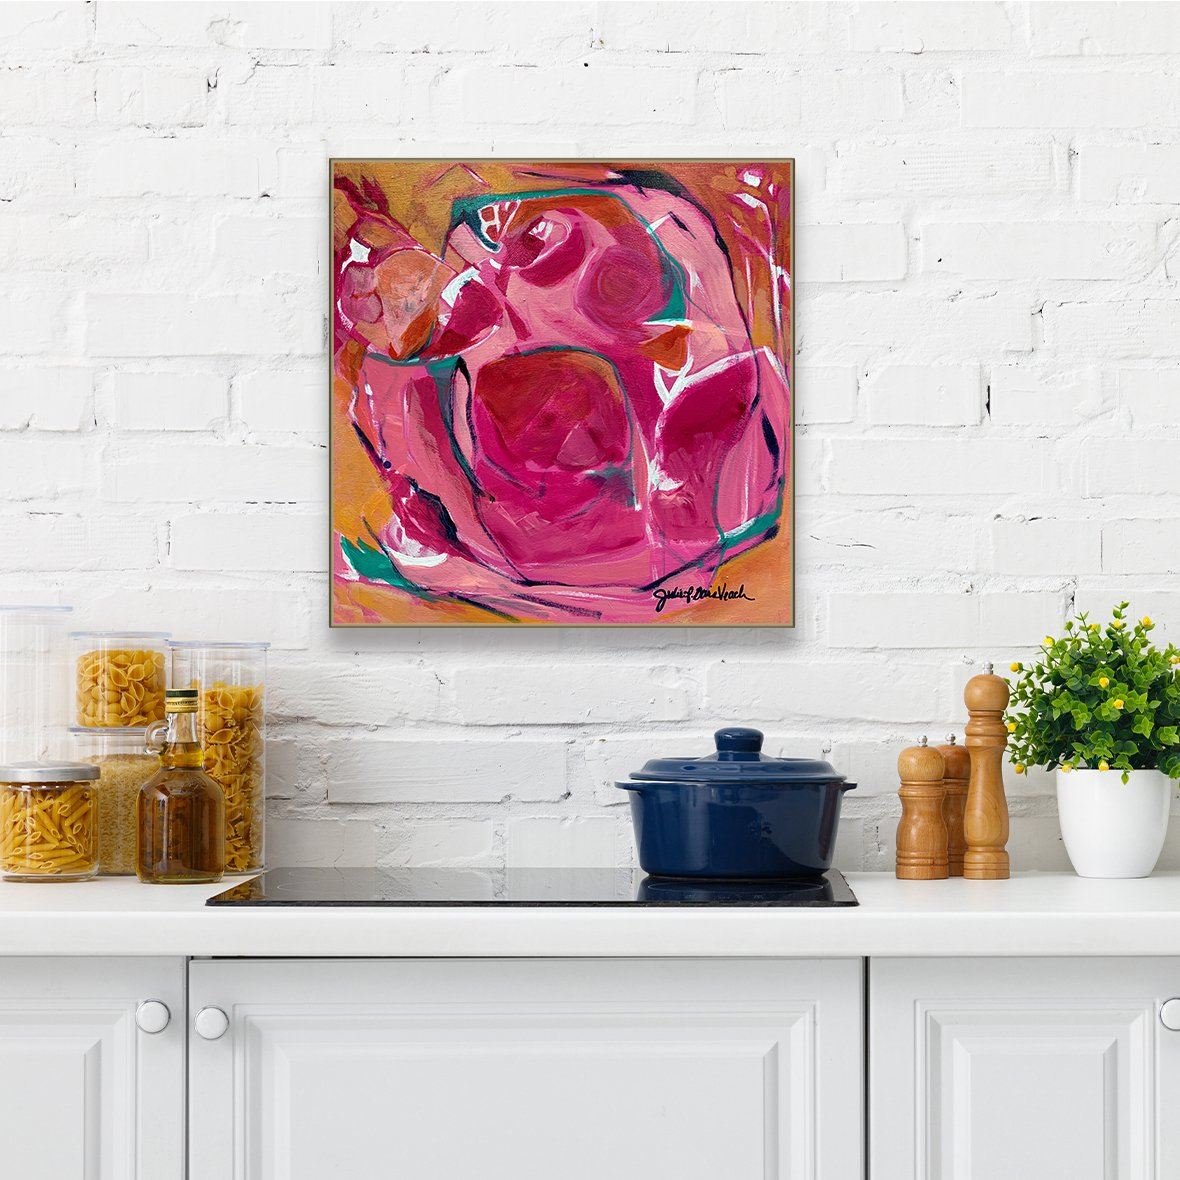 “Queen Bee"  24x24" original abstract acrylic painting on wood panel by Julie Davis Veach displayed hanging on a bright white wall in a contemporary kitchen.